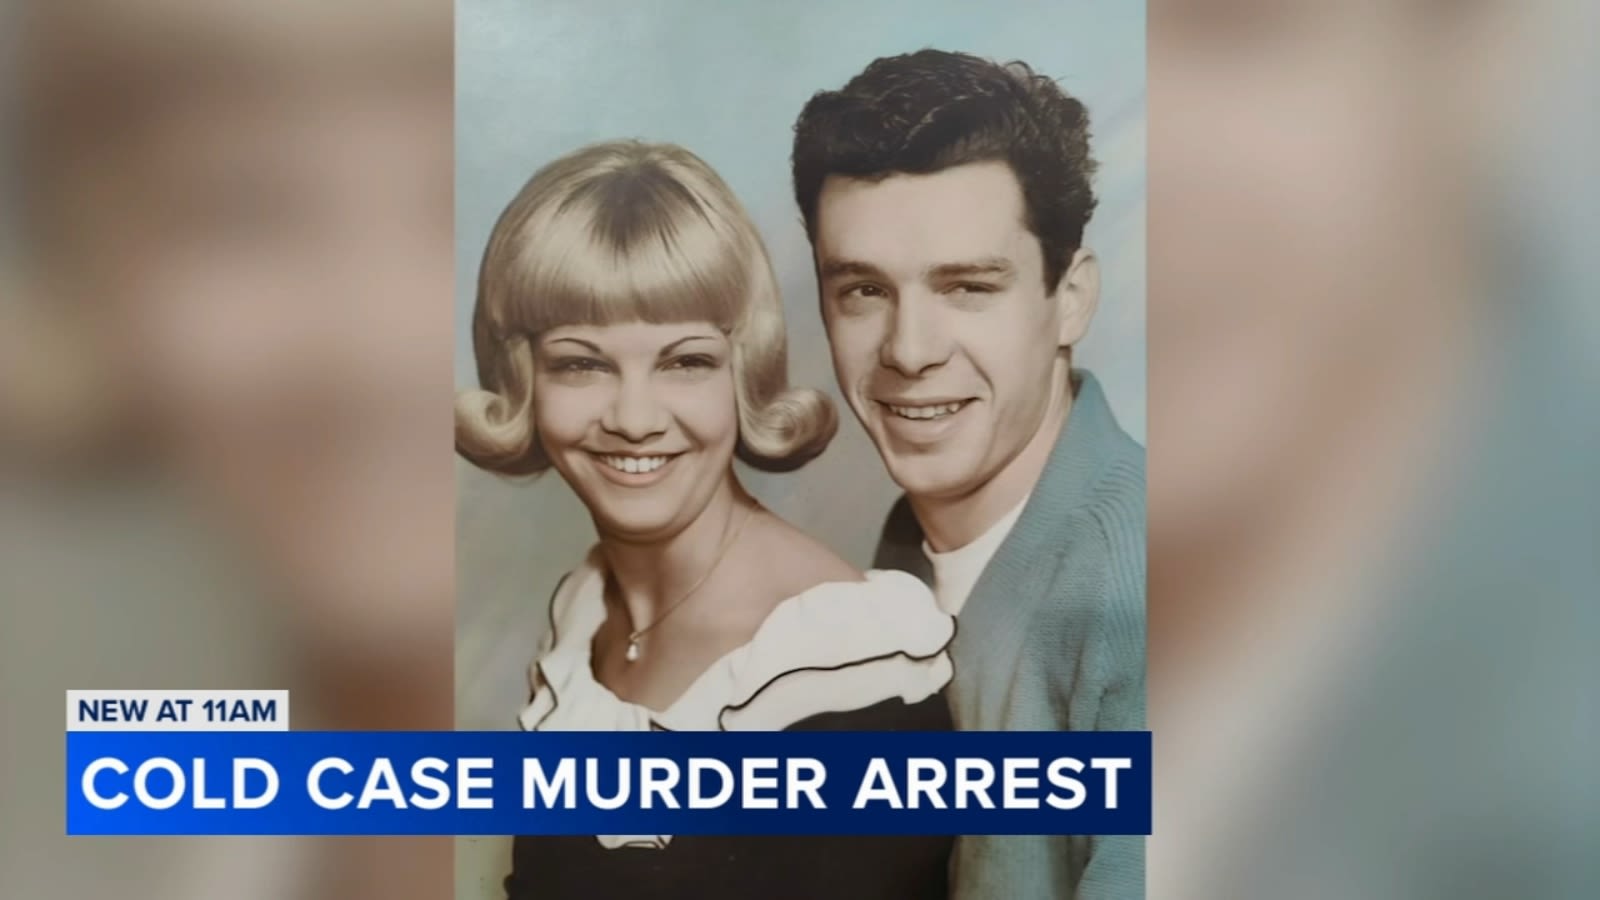 Tip line call reinitiated 1966 Calumet City cold case, leading to arrest of 79-year-old man